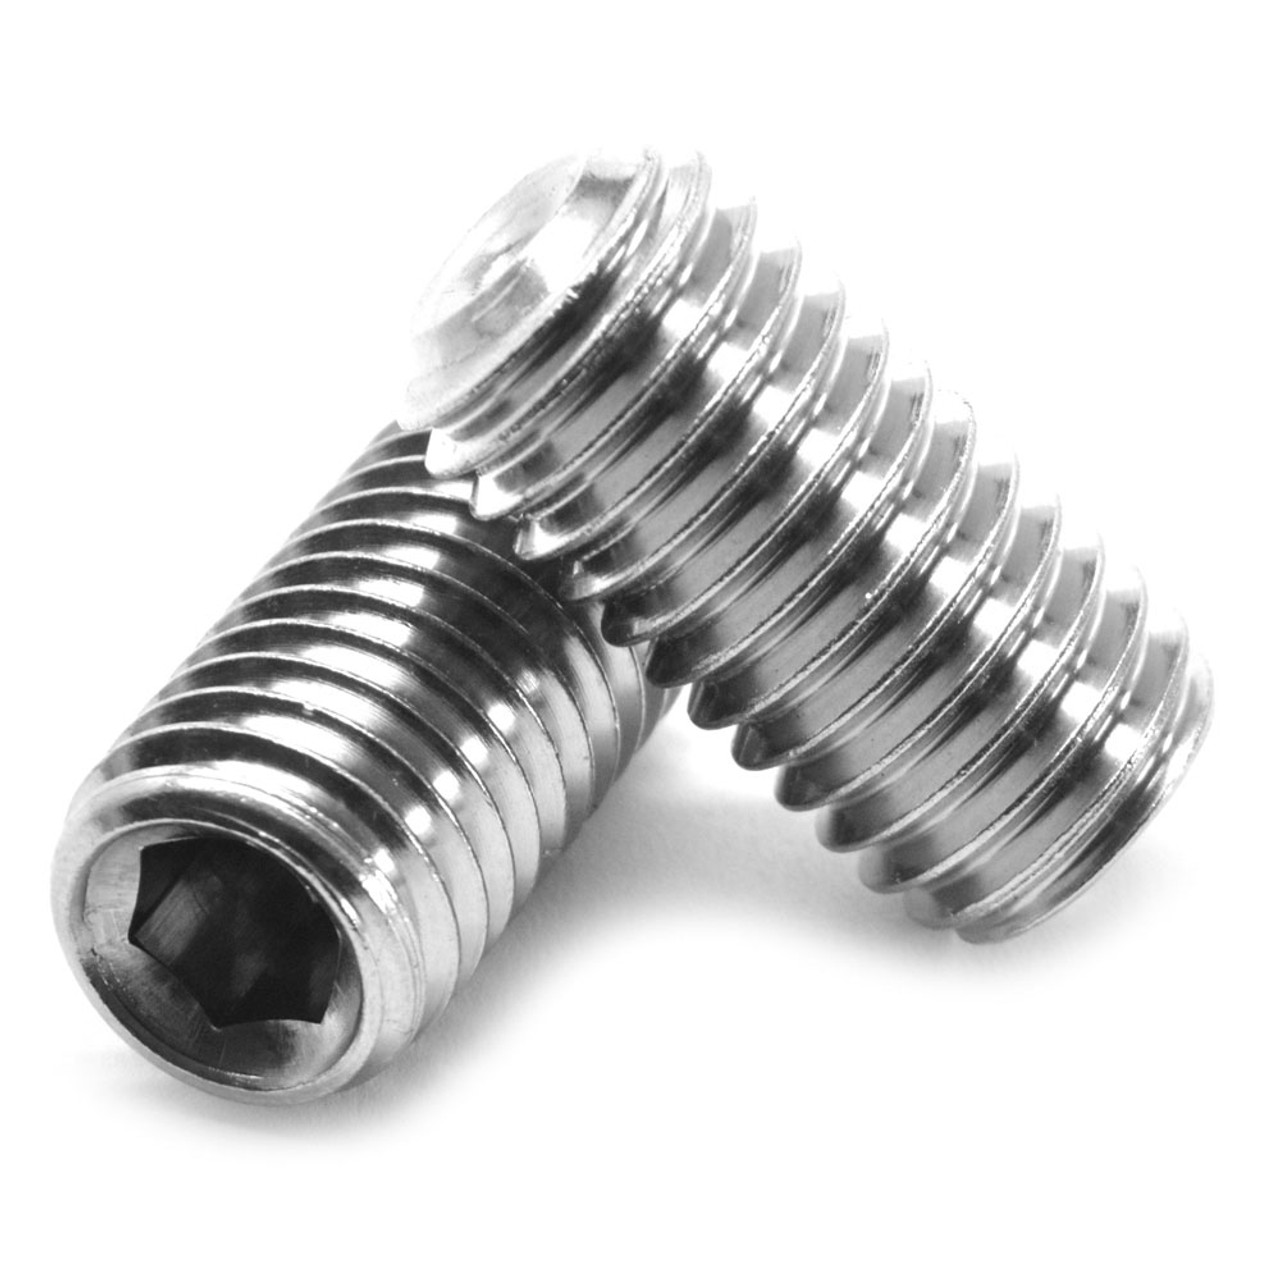 M8 x 1.25 x 20 MM Coarse Thread DIN 916 / ISO 4029 Socket Set Screw Cup Point Stainless Steel 316